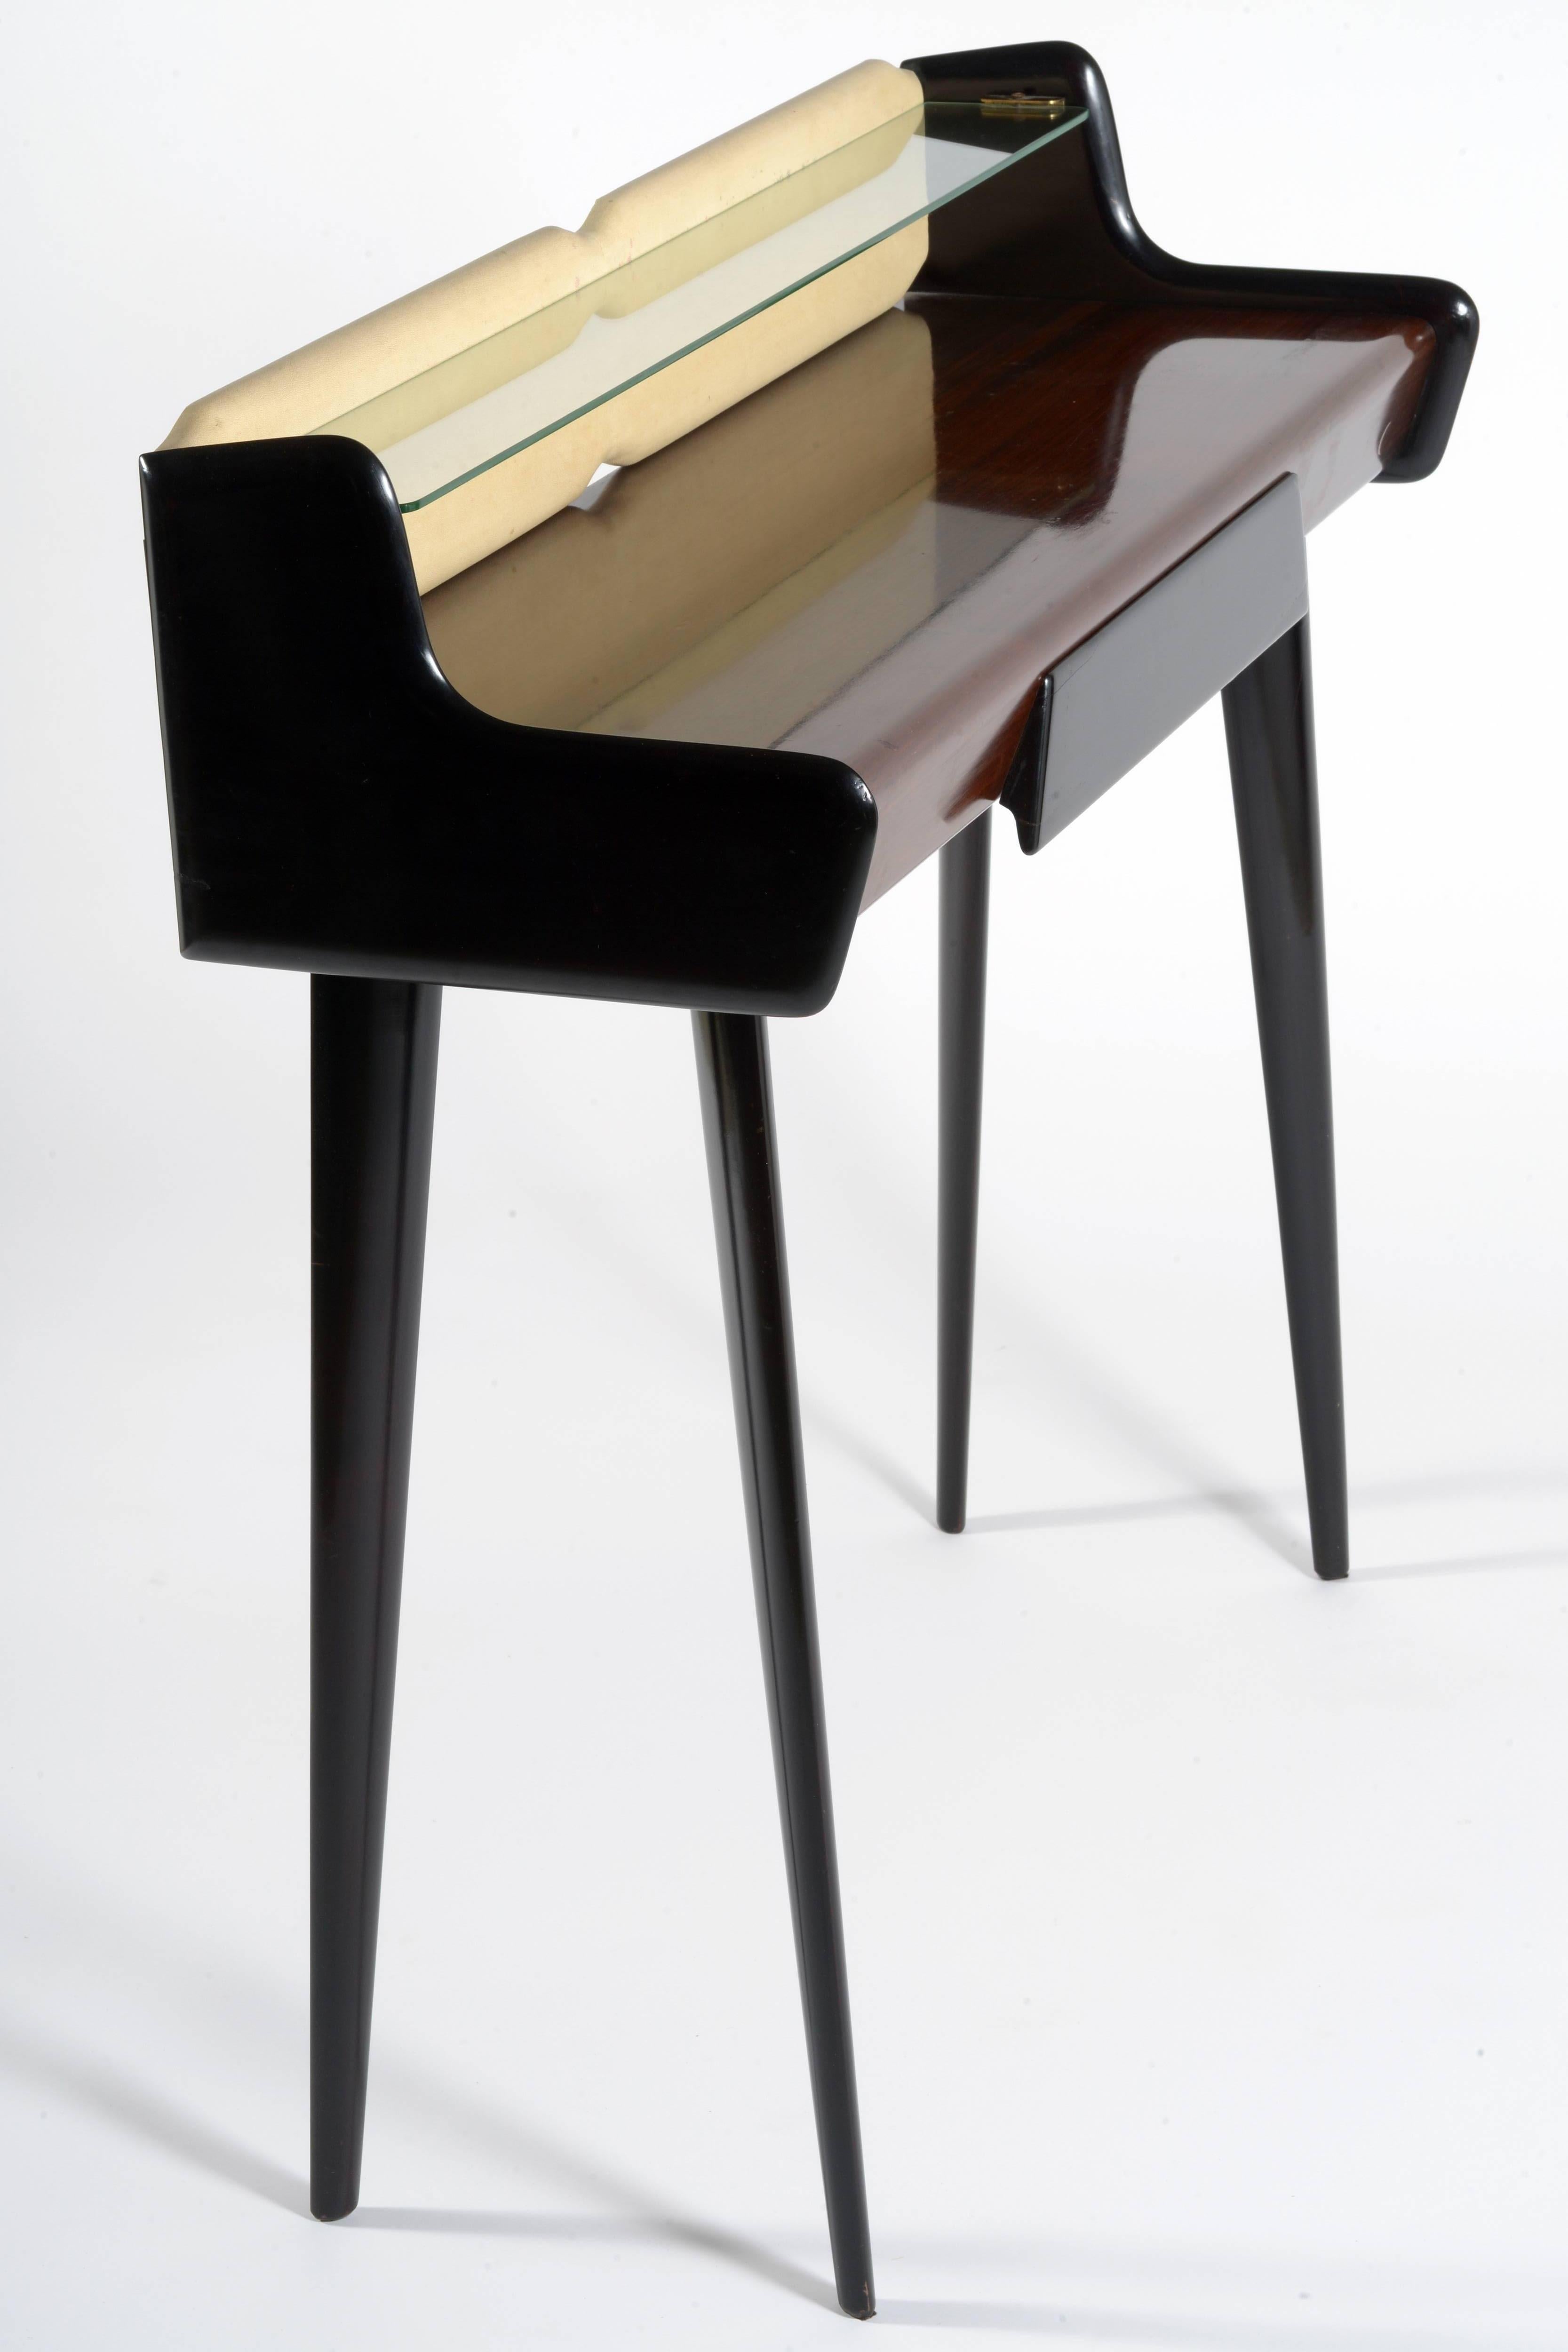 Italian 1950s console, black laquered slender end elegant legs and drawer.
One glass shelf supported by brass details.
The beige part is a panel covered with faux leather.